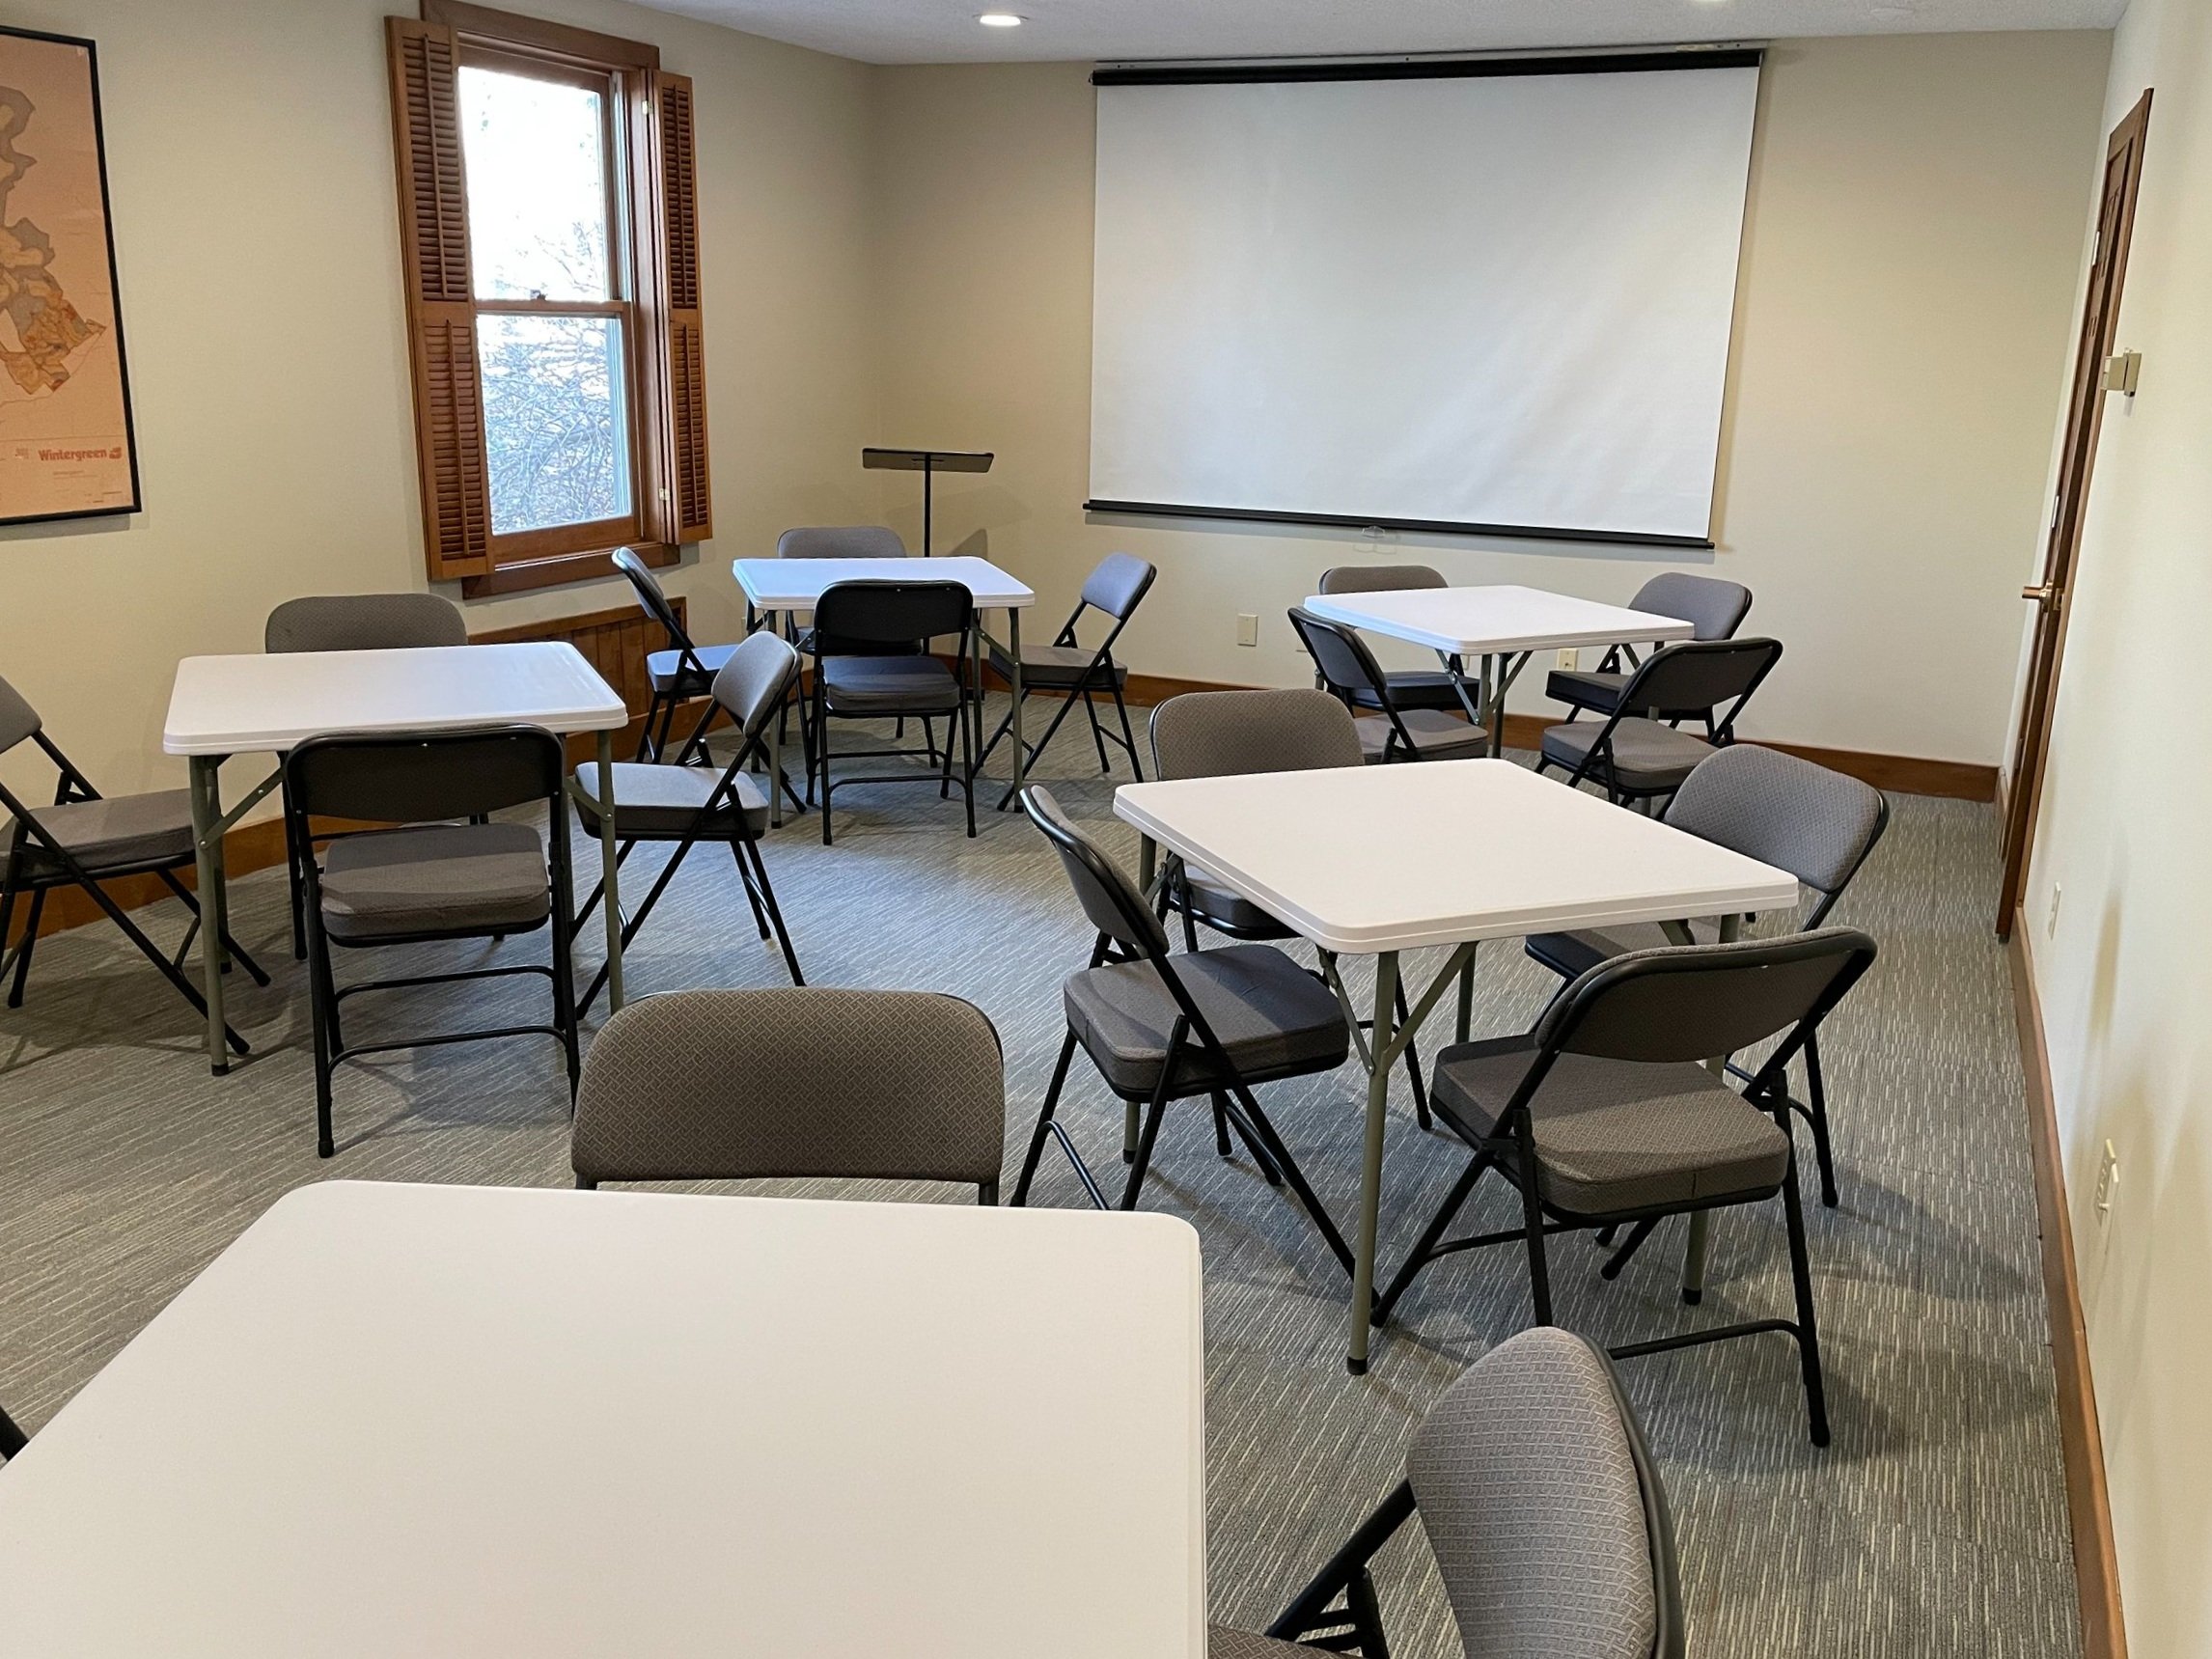   Seating for approximately 24, LCD projector, podium, and a mix of card tables and 6 foot tables depending on your needs.  